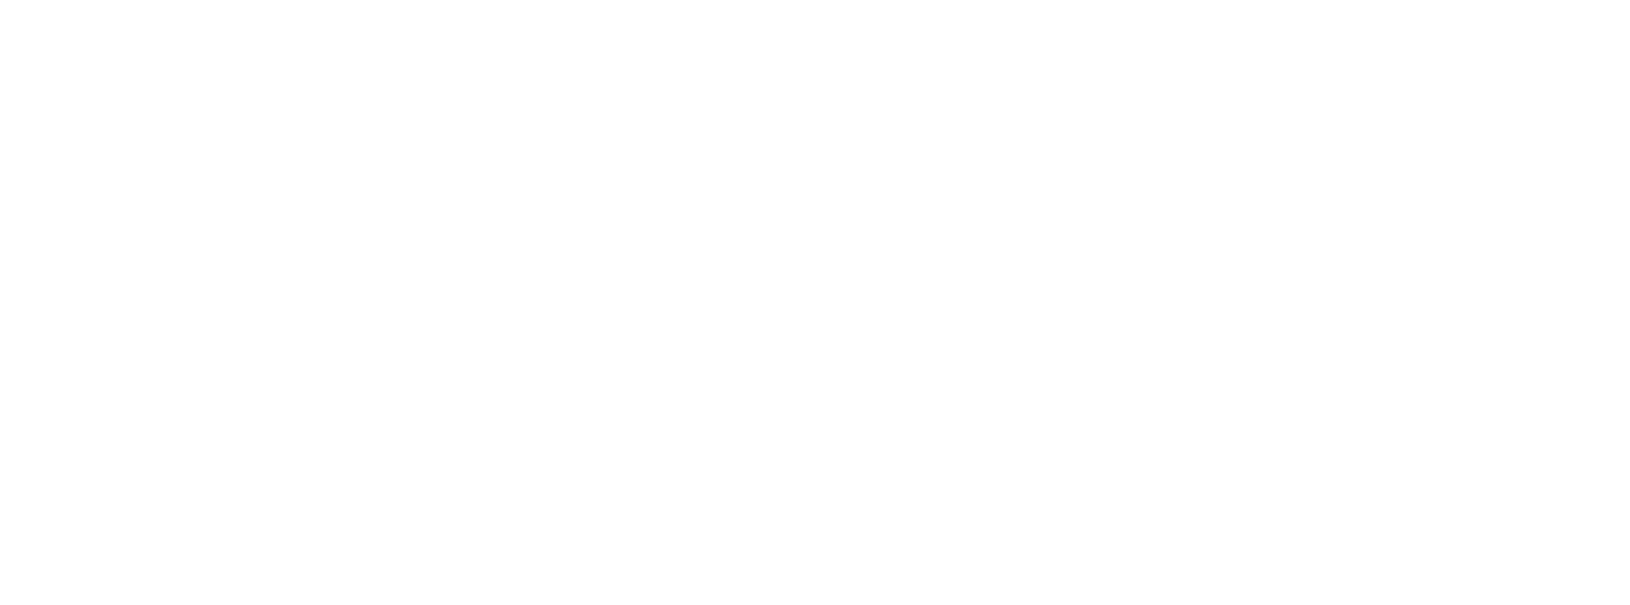 World of Sharks by Save Our Seas Foundation